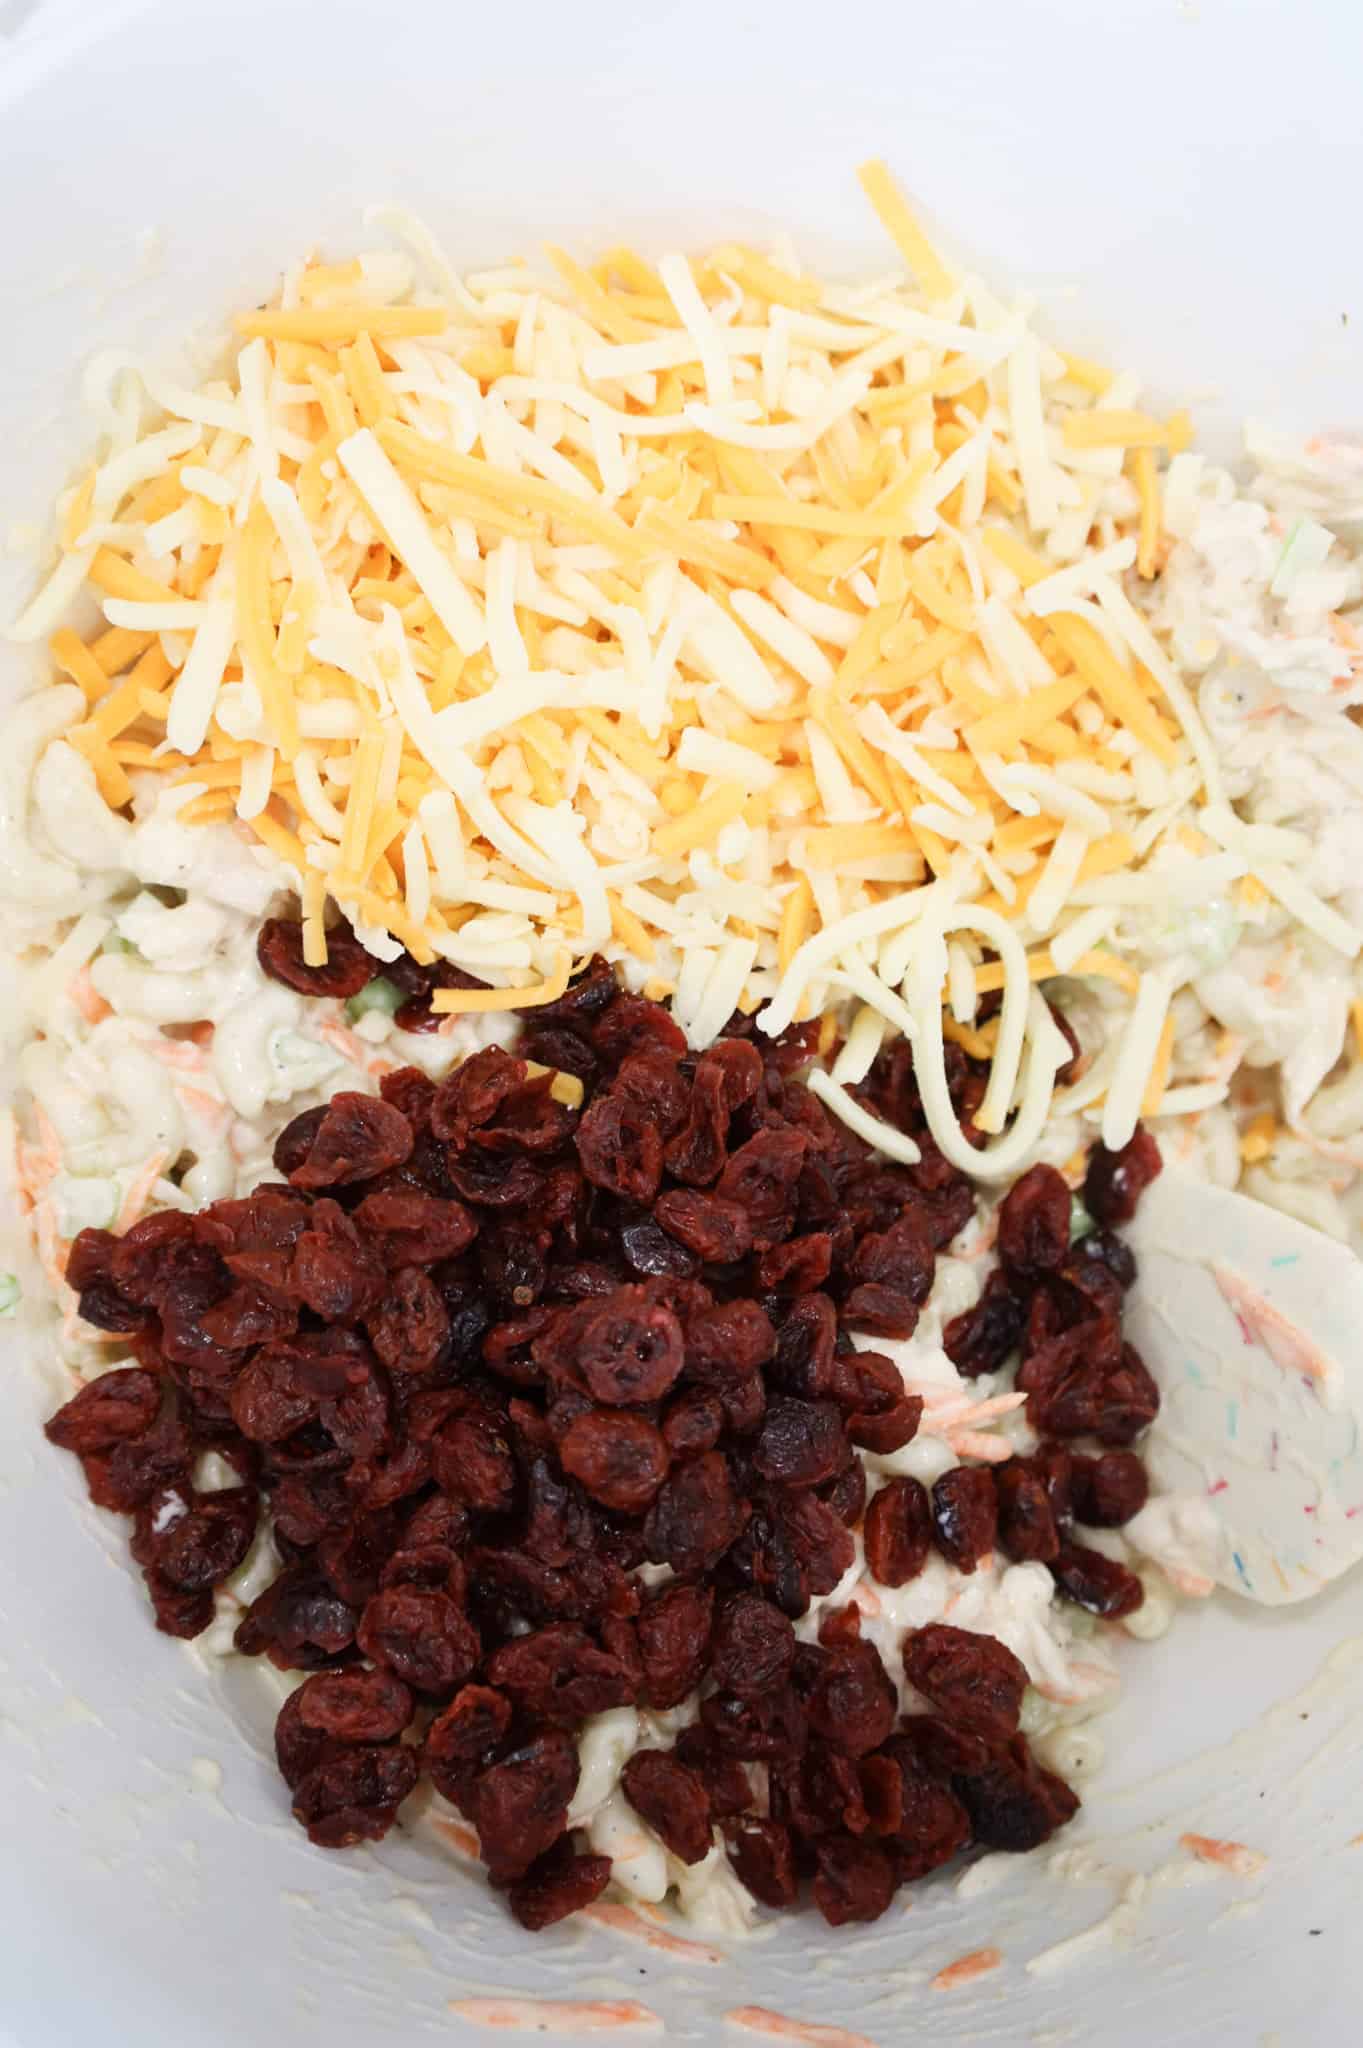 shredded cheddar and dried cranberries on top of macaroni salad in a mixing bowl